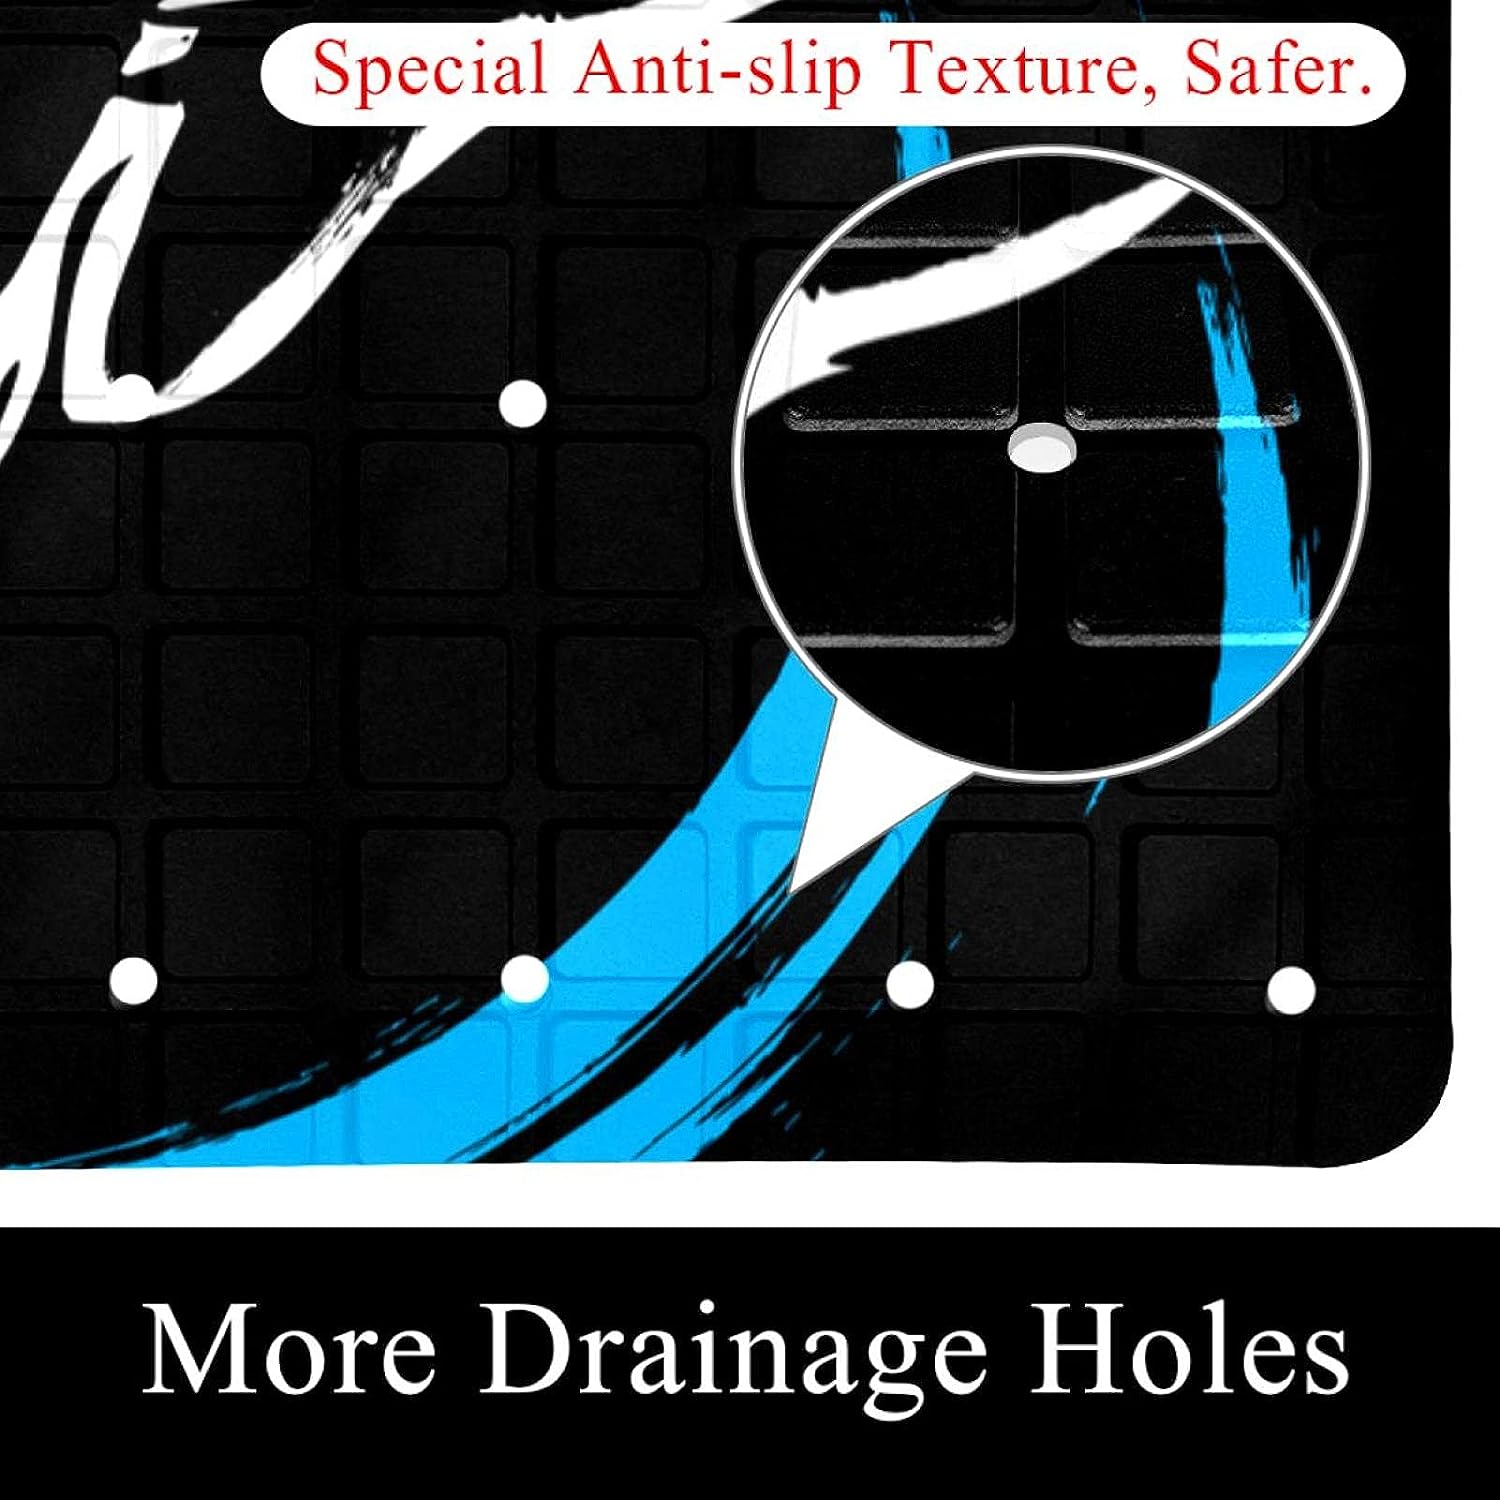 Bathtub Mats for Sitting Non Slip Shower Mats with Suction Cups Drain Holes Soft Safety Mats for Baby & Elderly Black Killer Whale Orca